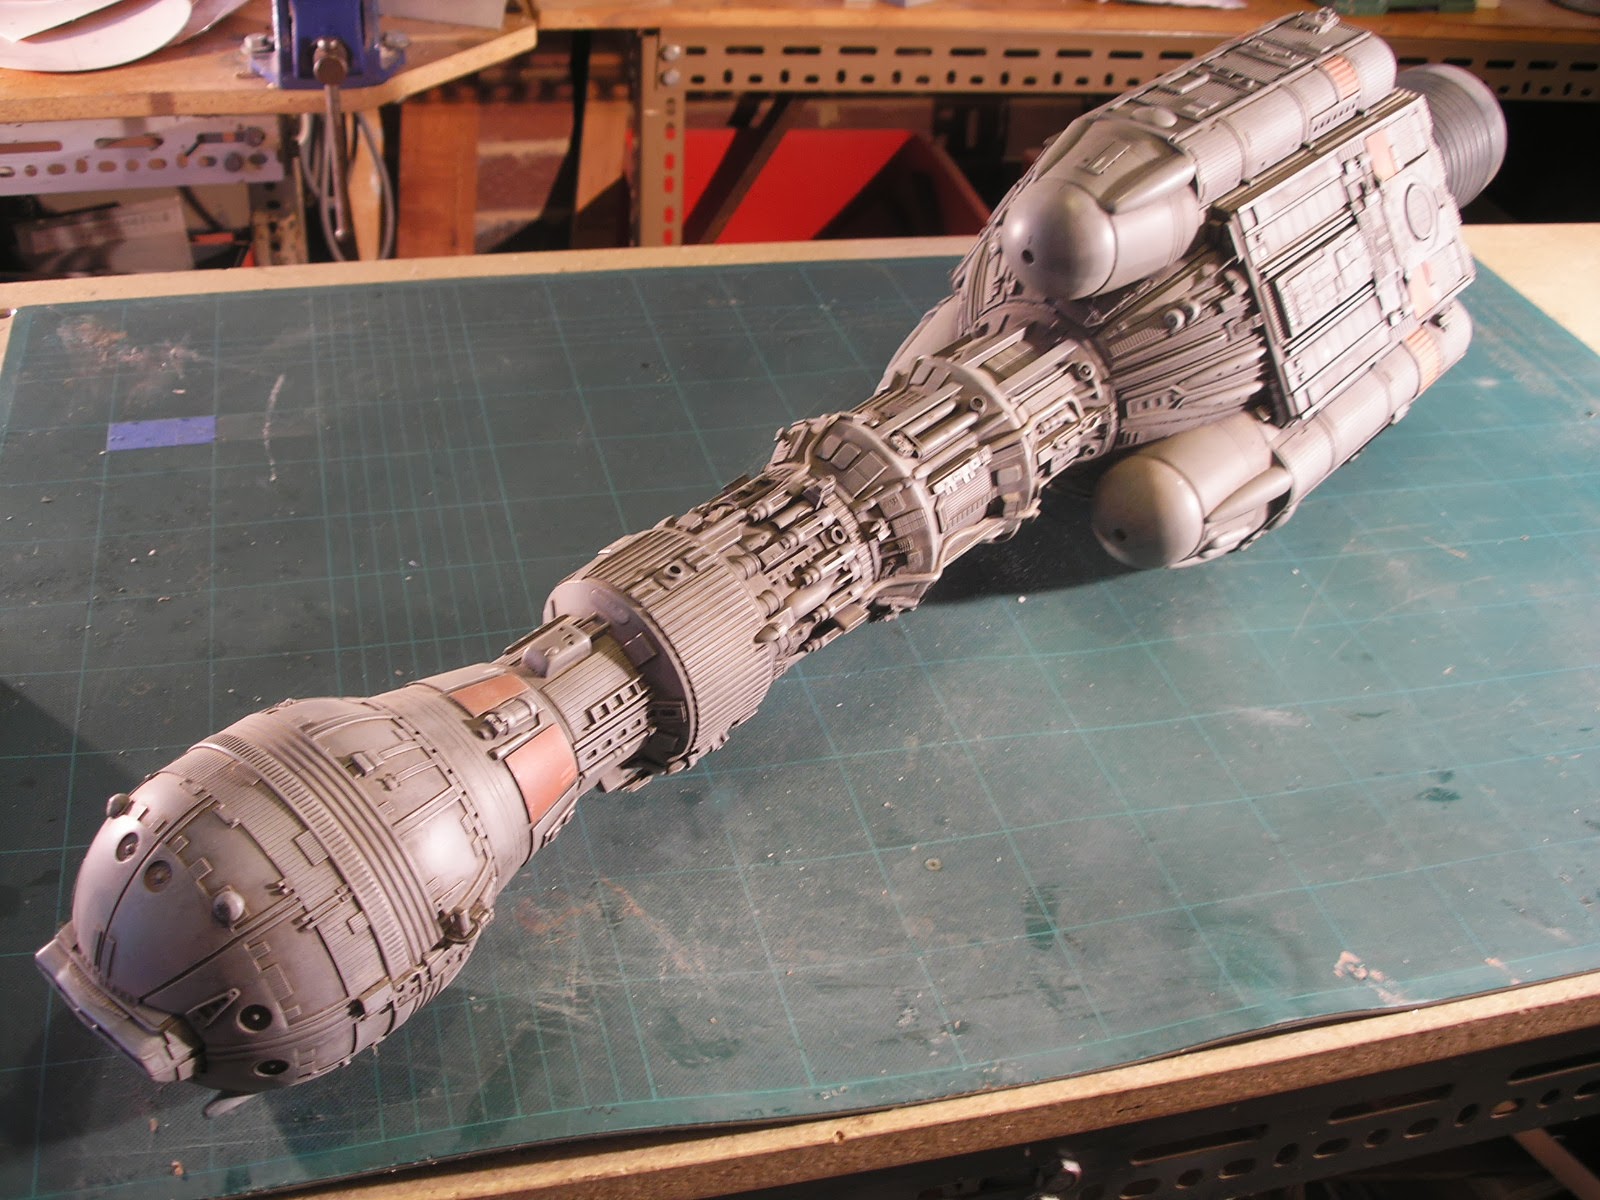 RC Sci Fi: Old Spaceship model Part 1